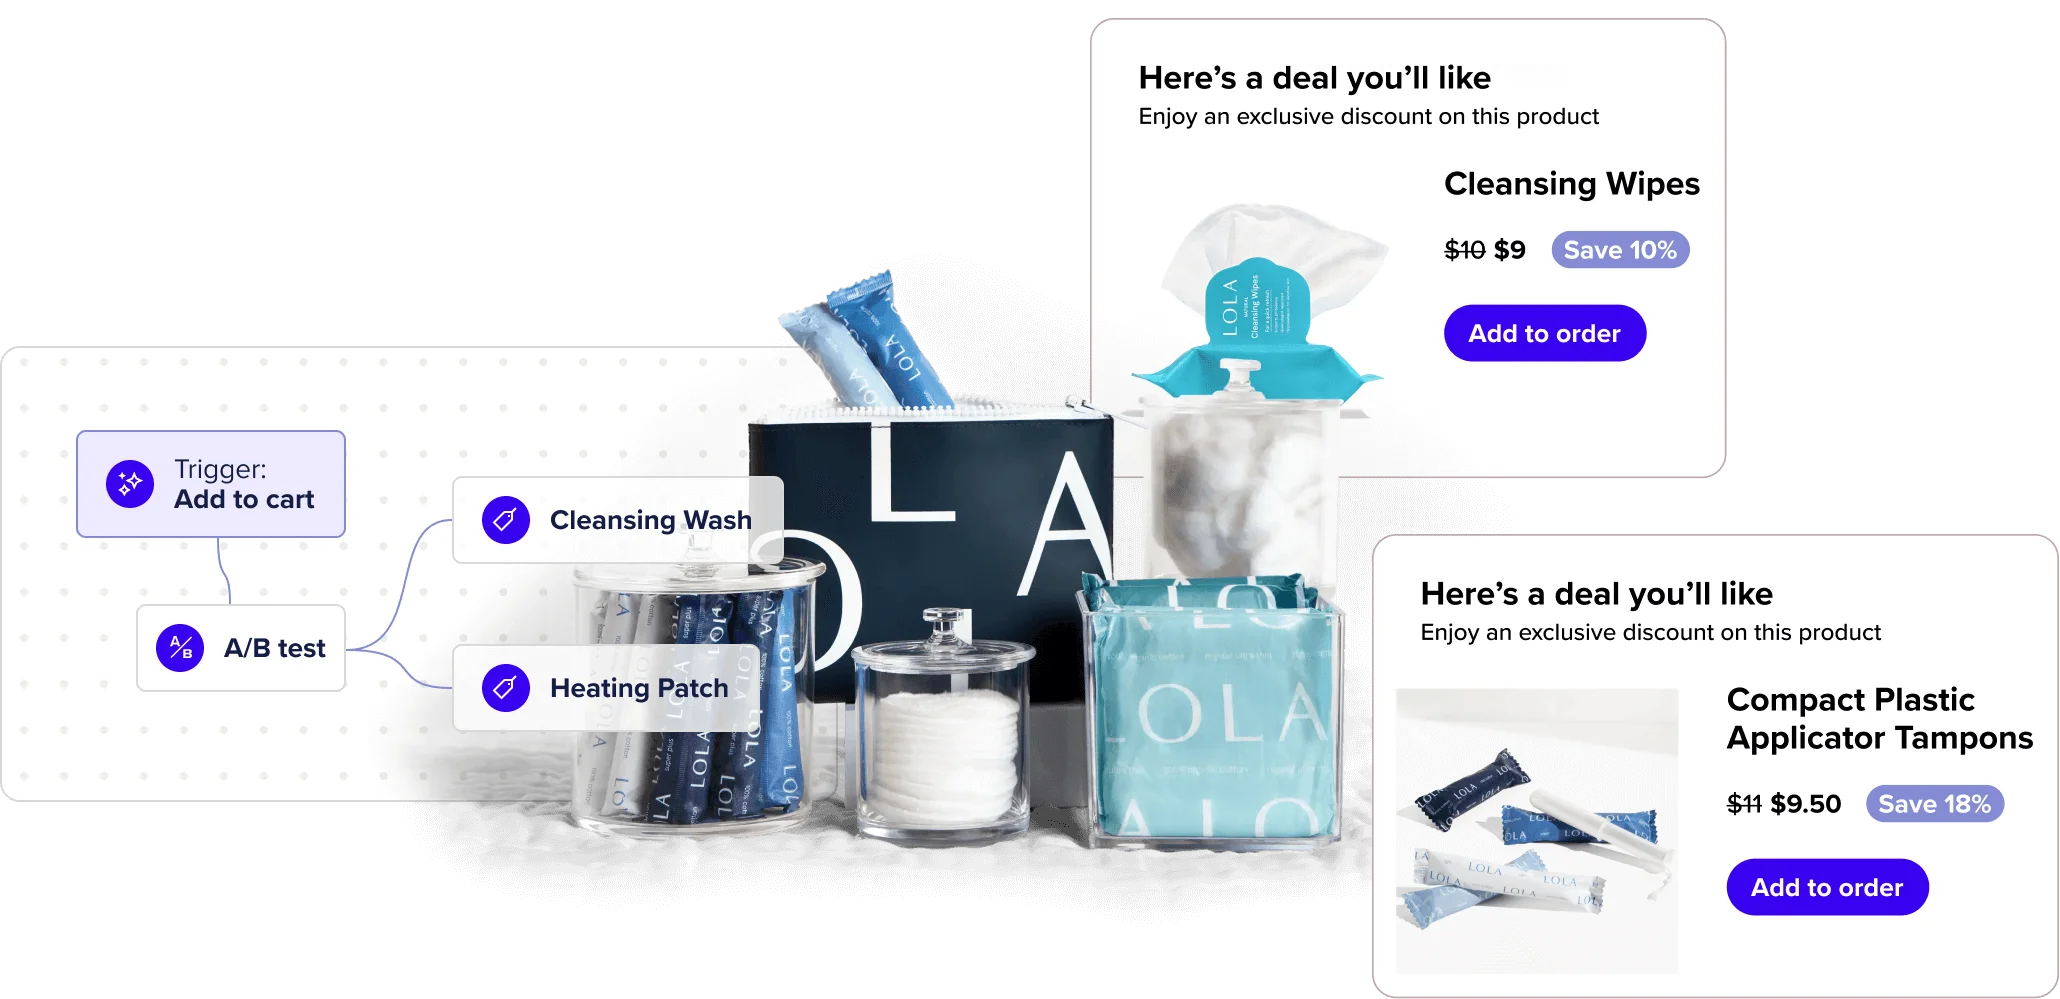 A series of LOLA products surrounded by a flow chart and ecommerce inputs illustrating a traditional Grow path